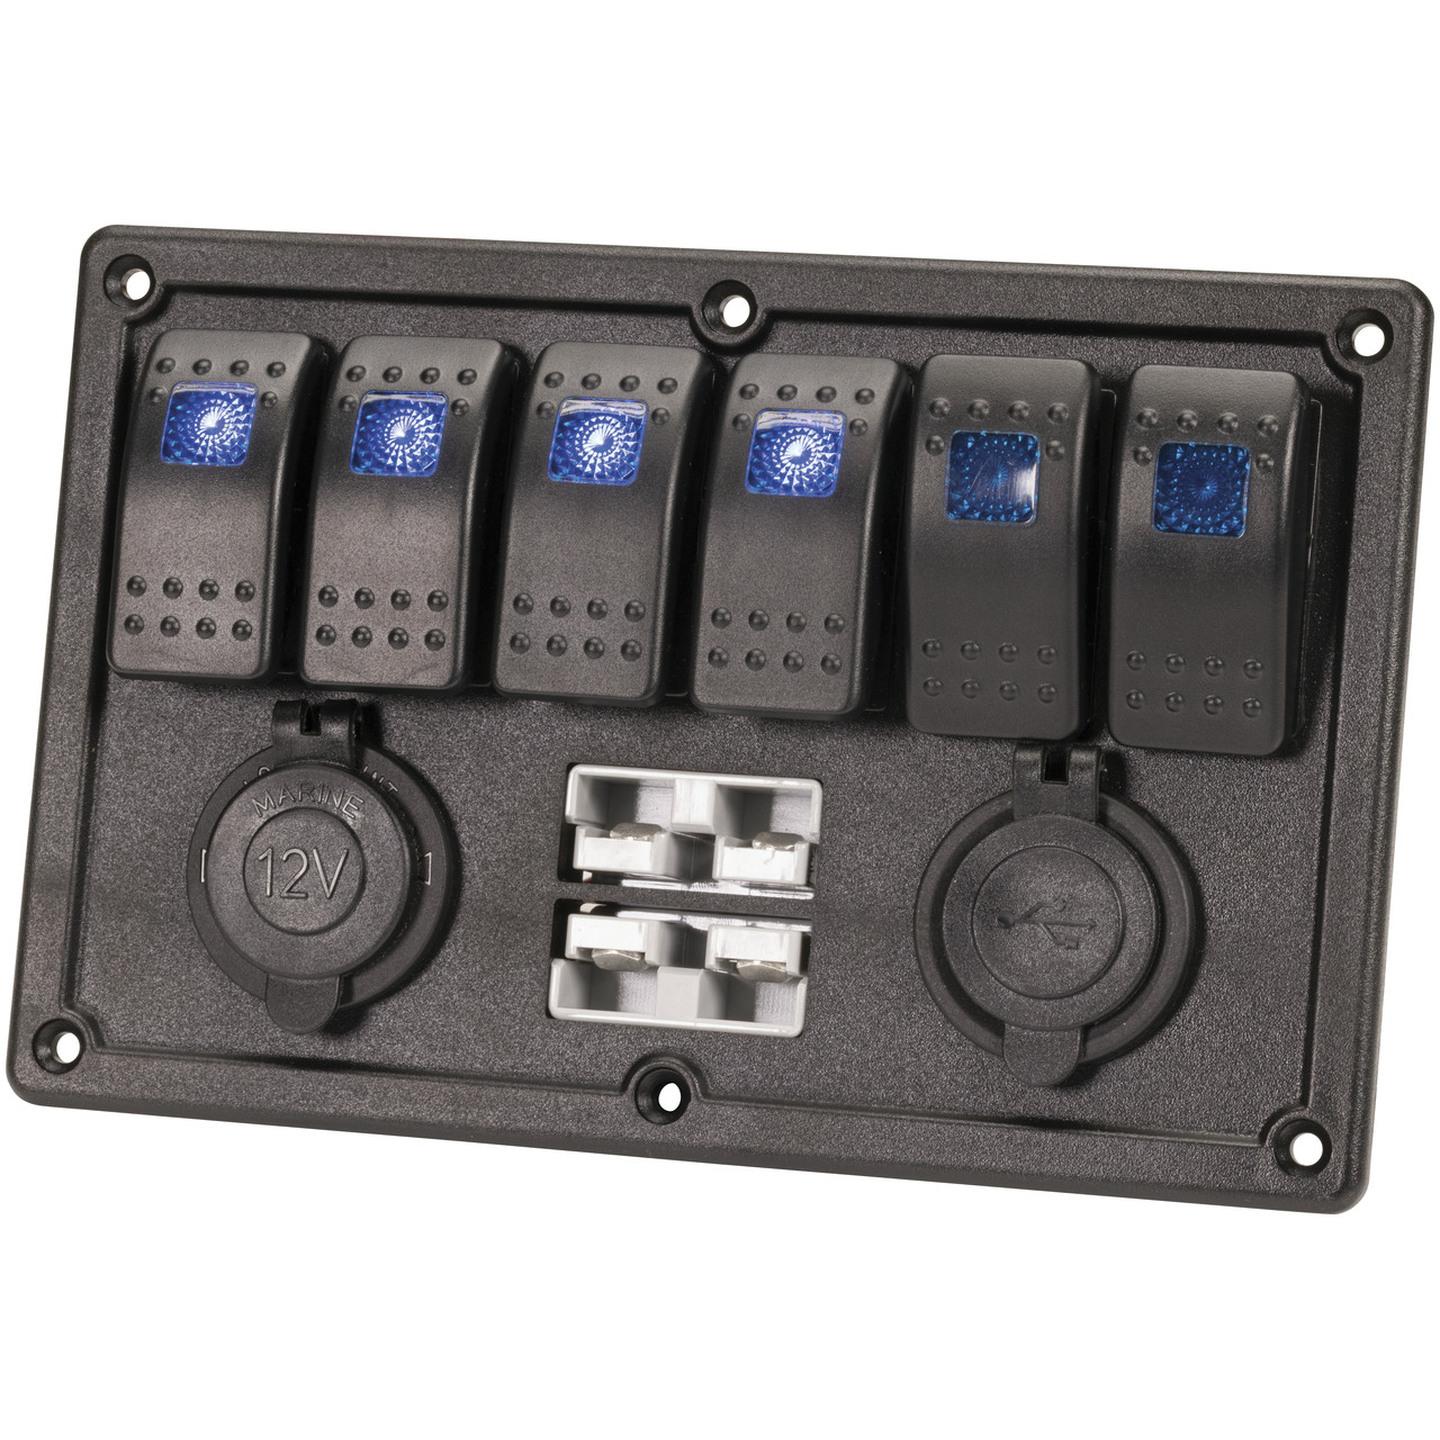 6 Way Illuminated Switch Panel With USB 12V and 2 x Battery Plugs